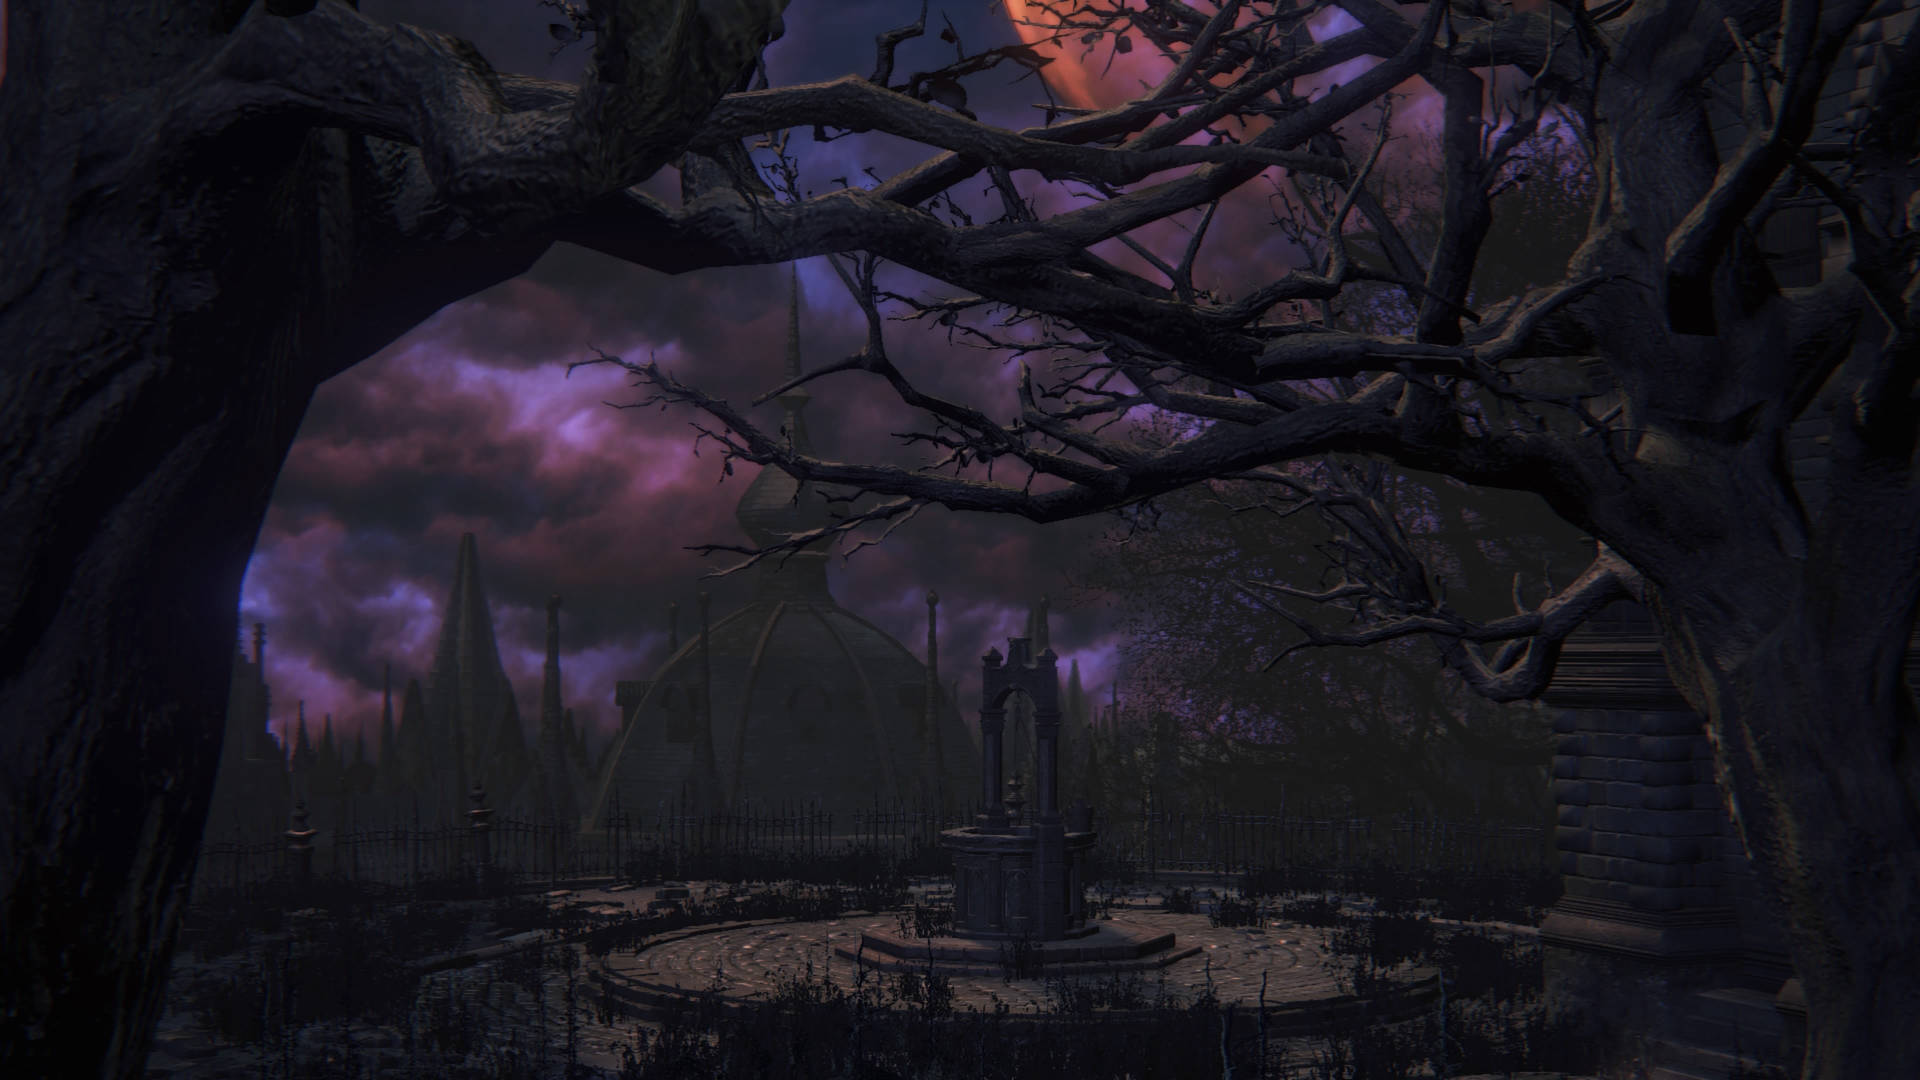 Yharnam Cathedral Plaza, the chilling center of Bloodborne Wallpaper